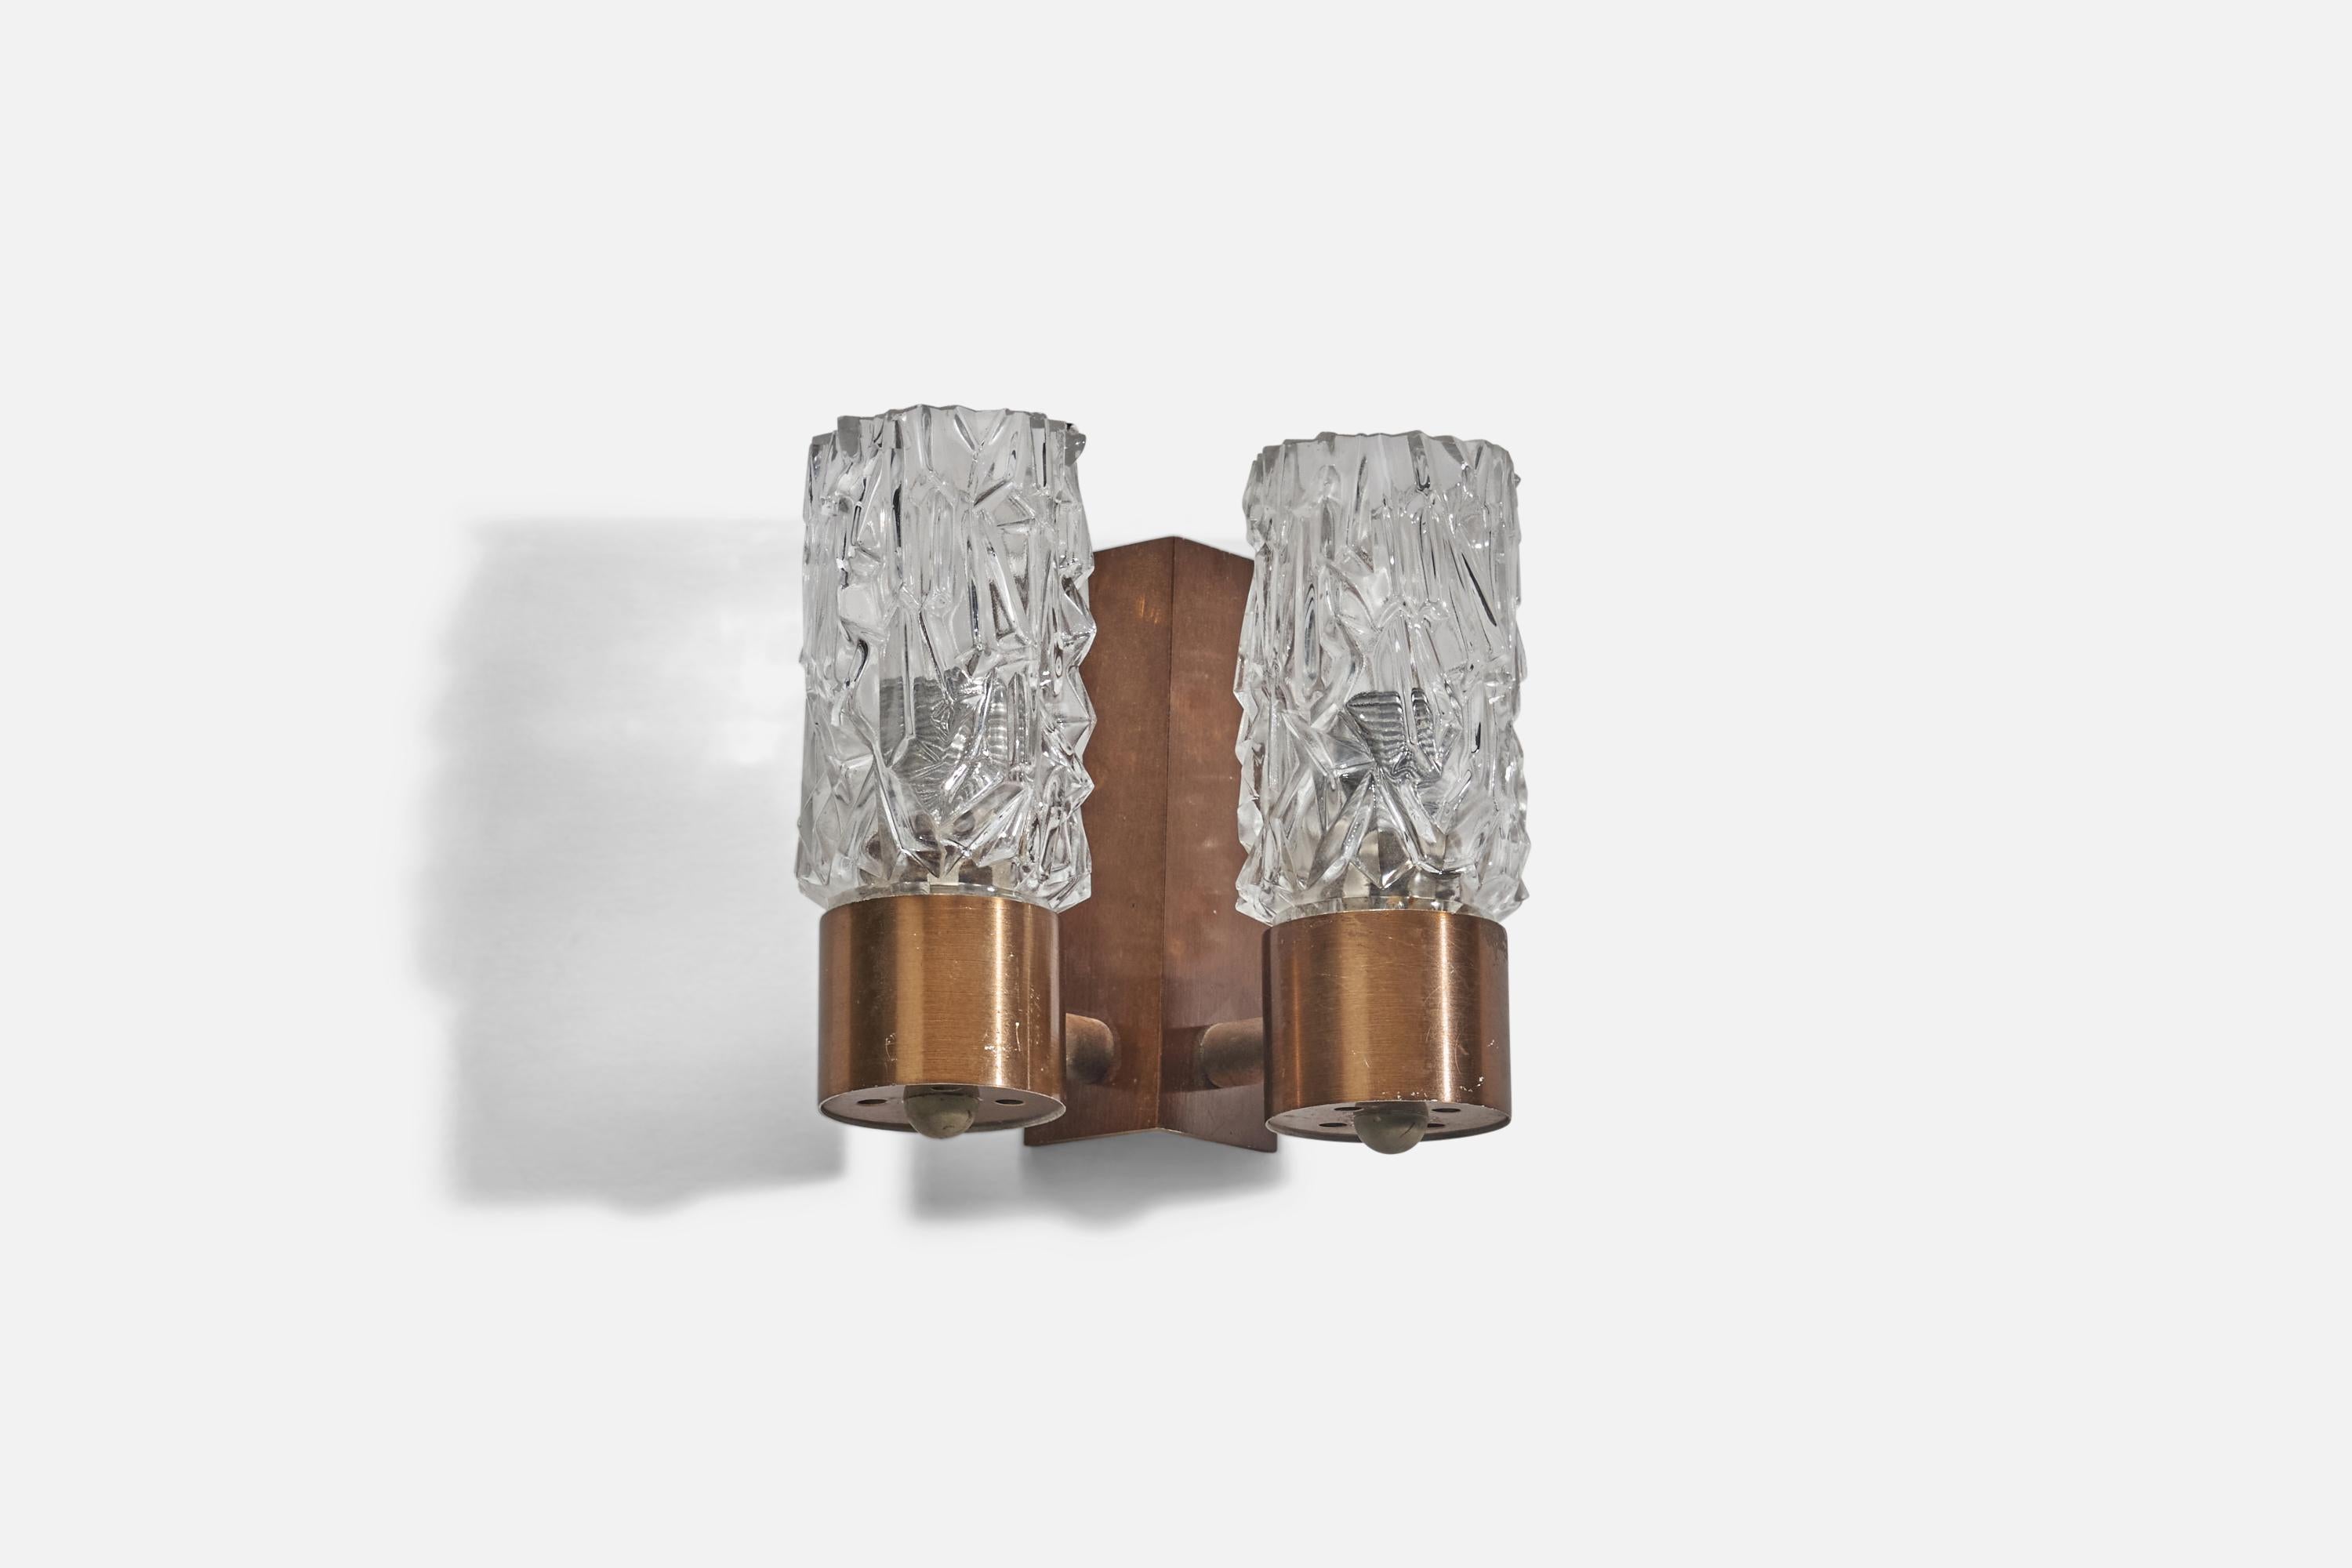 A pair of brass and glass sconces designed and produced in Italy, 1950s.

Dimensions of back plate (inches) : 5.13 x 2.16 x 1.18 (height x width x depth)

Sockets take E-14 bulbs.

There is no maximum wattage stated on the fixtures.